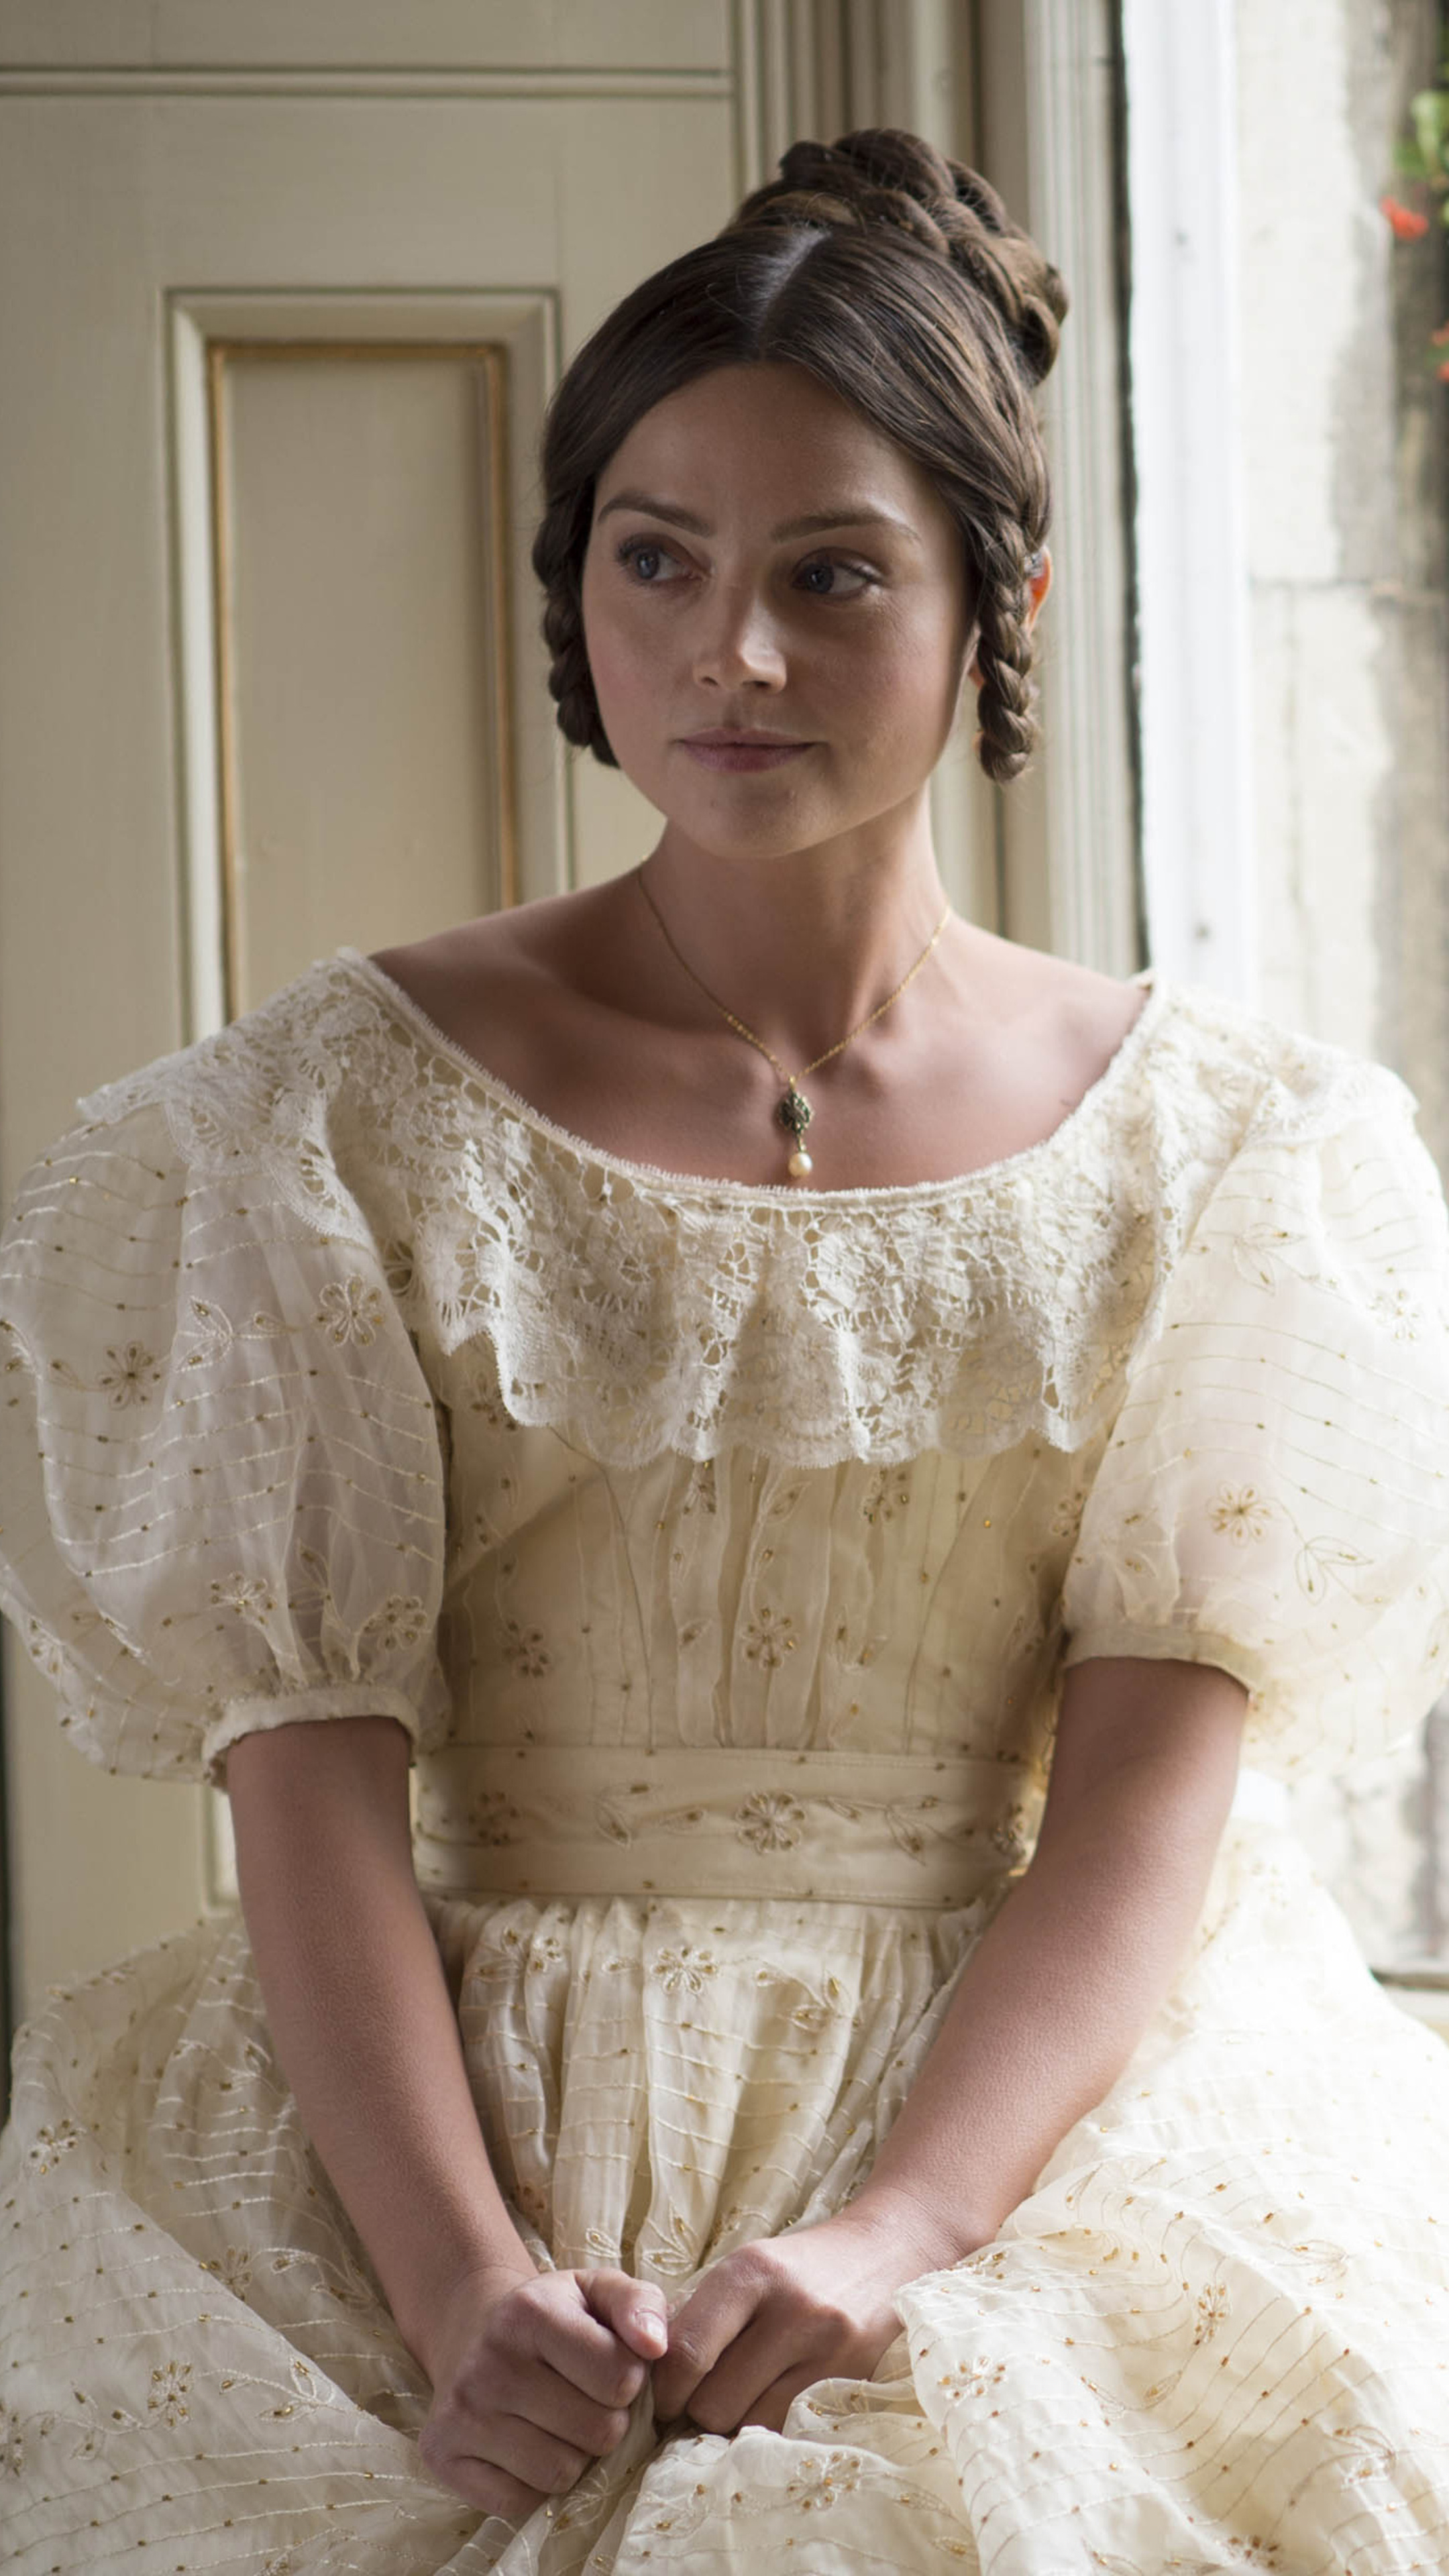 Jenna Coleman, Queen Victoria portrayal, Xperia phone wallpapers, Captivating images, 2160x3840 4K Handy